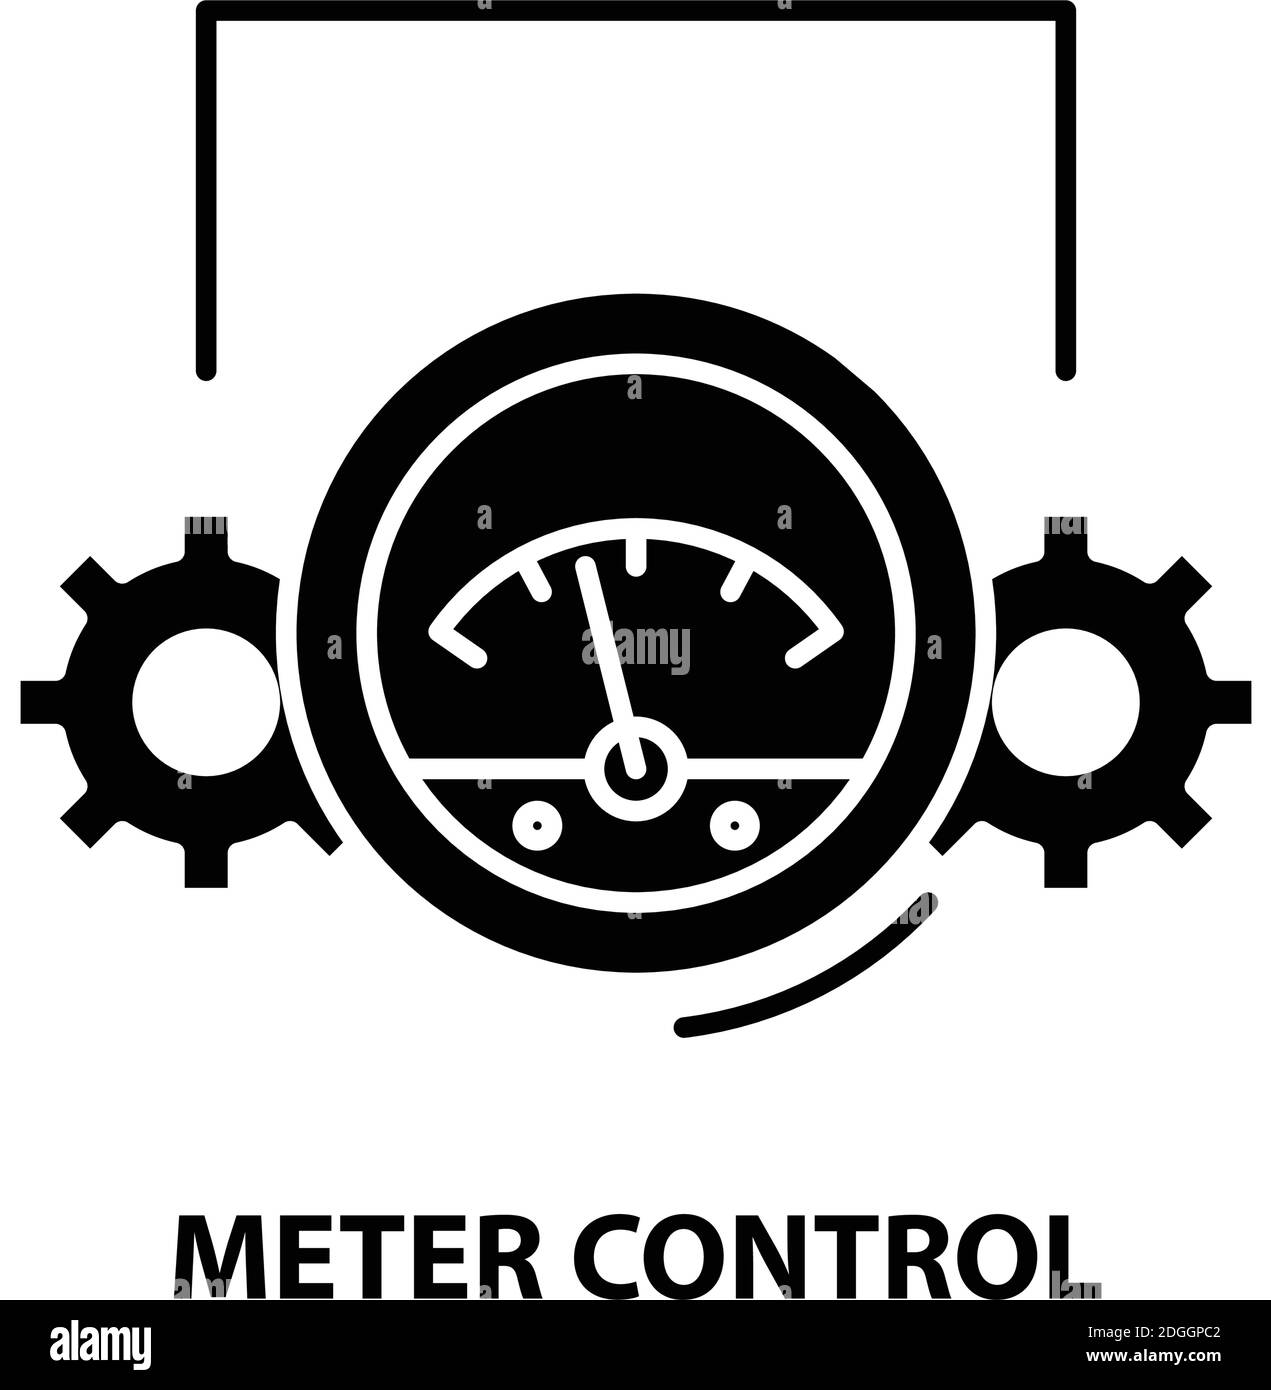 meter control icon, black vector sign with editable strokes, concept illustration Stock Vector